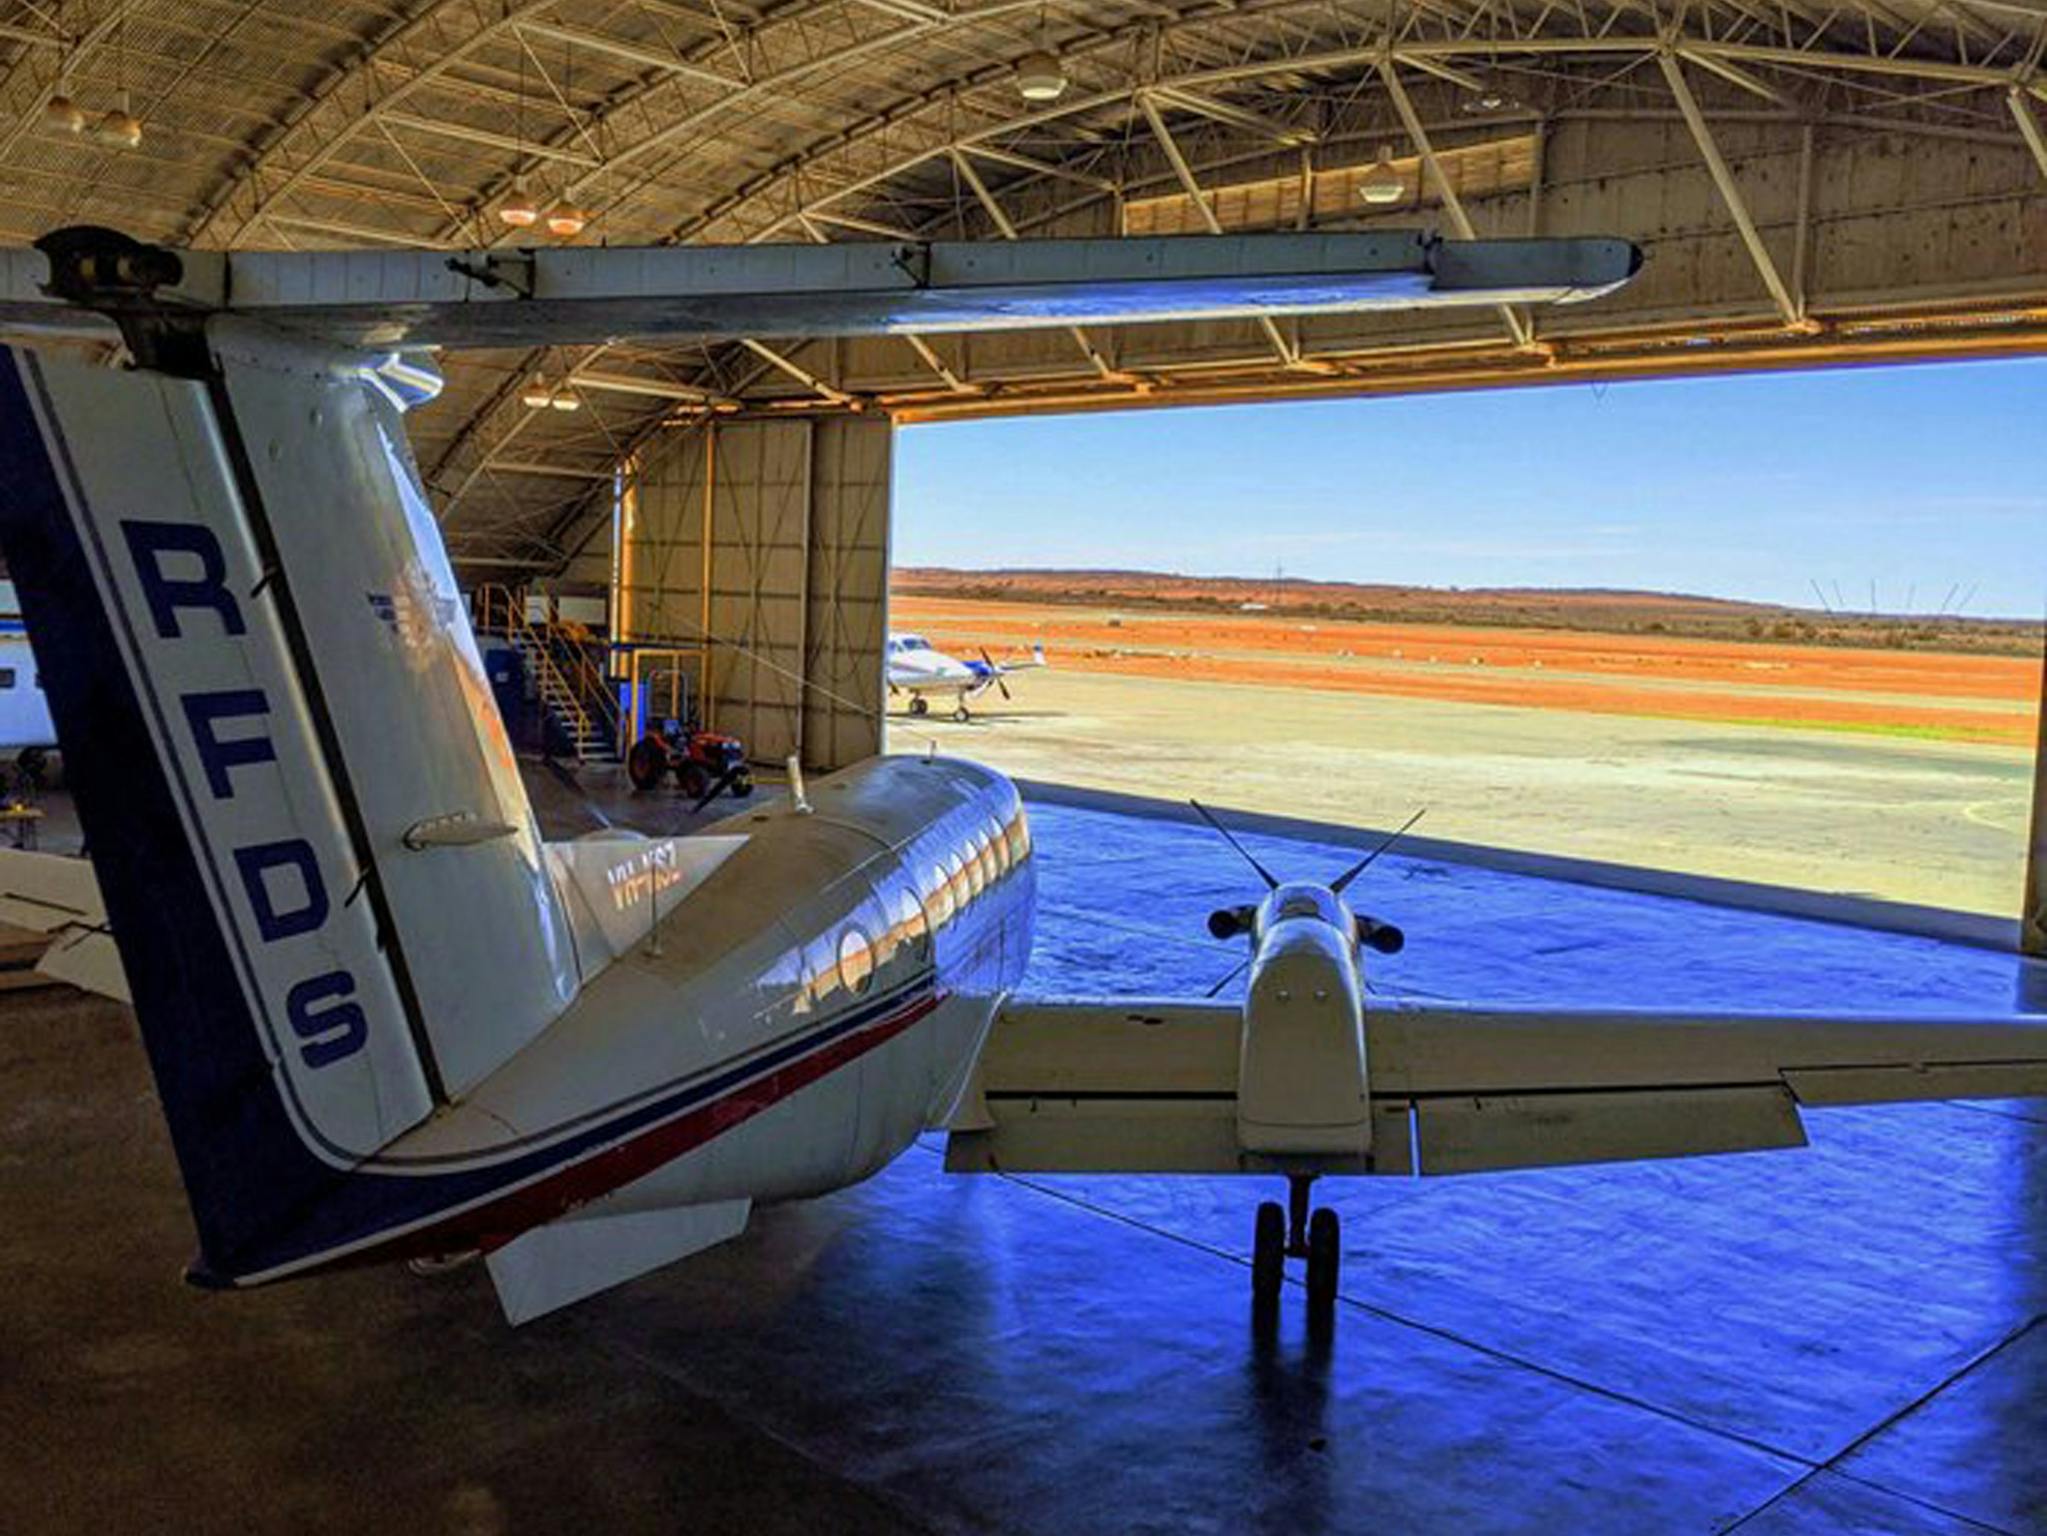 The Royal Flying Doctor Service Outback Experience in Broken Hill